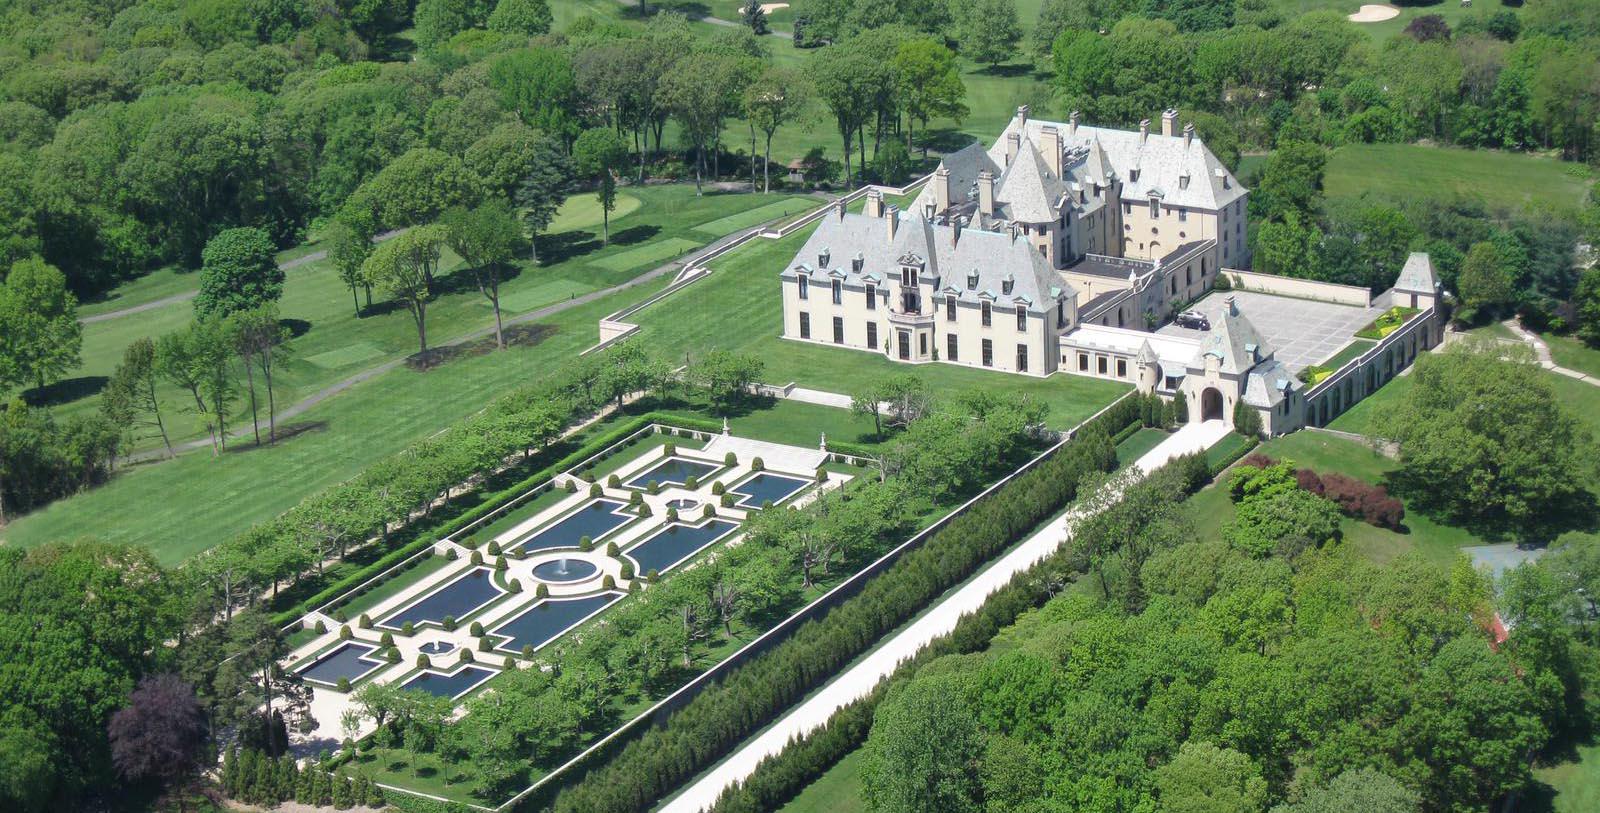 Image of Exterior & Gardens, OHEKA CASTLE, Huntington, New York, 1919, Member of Historic Hotels of America, Overview